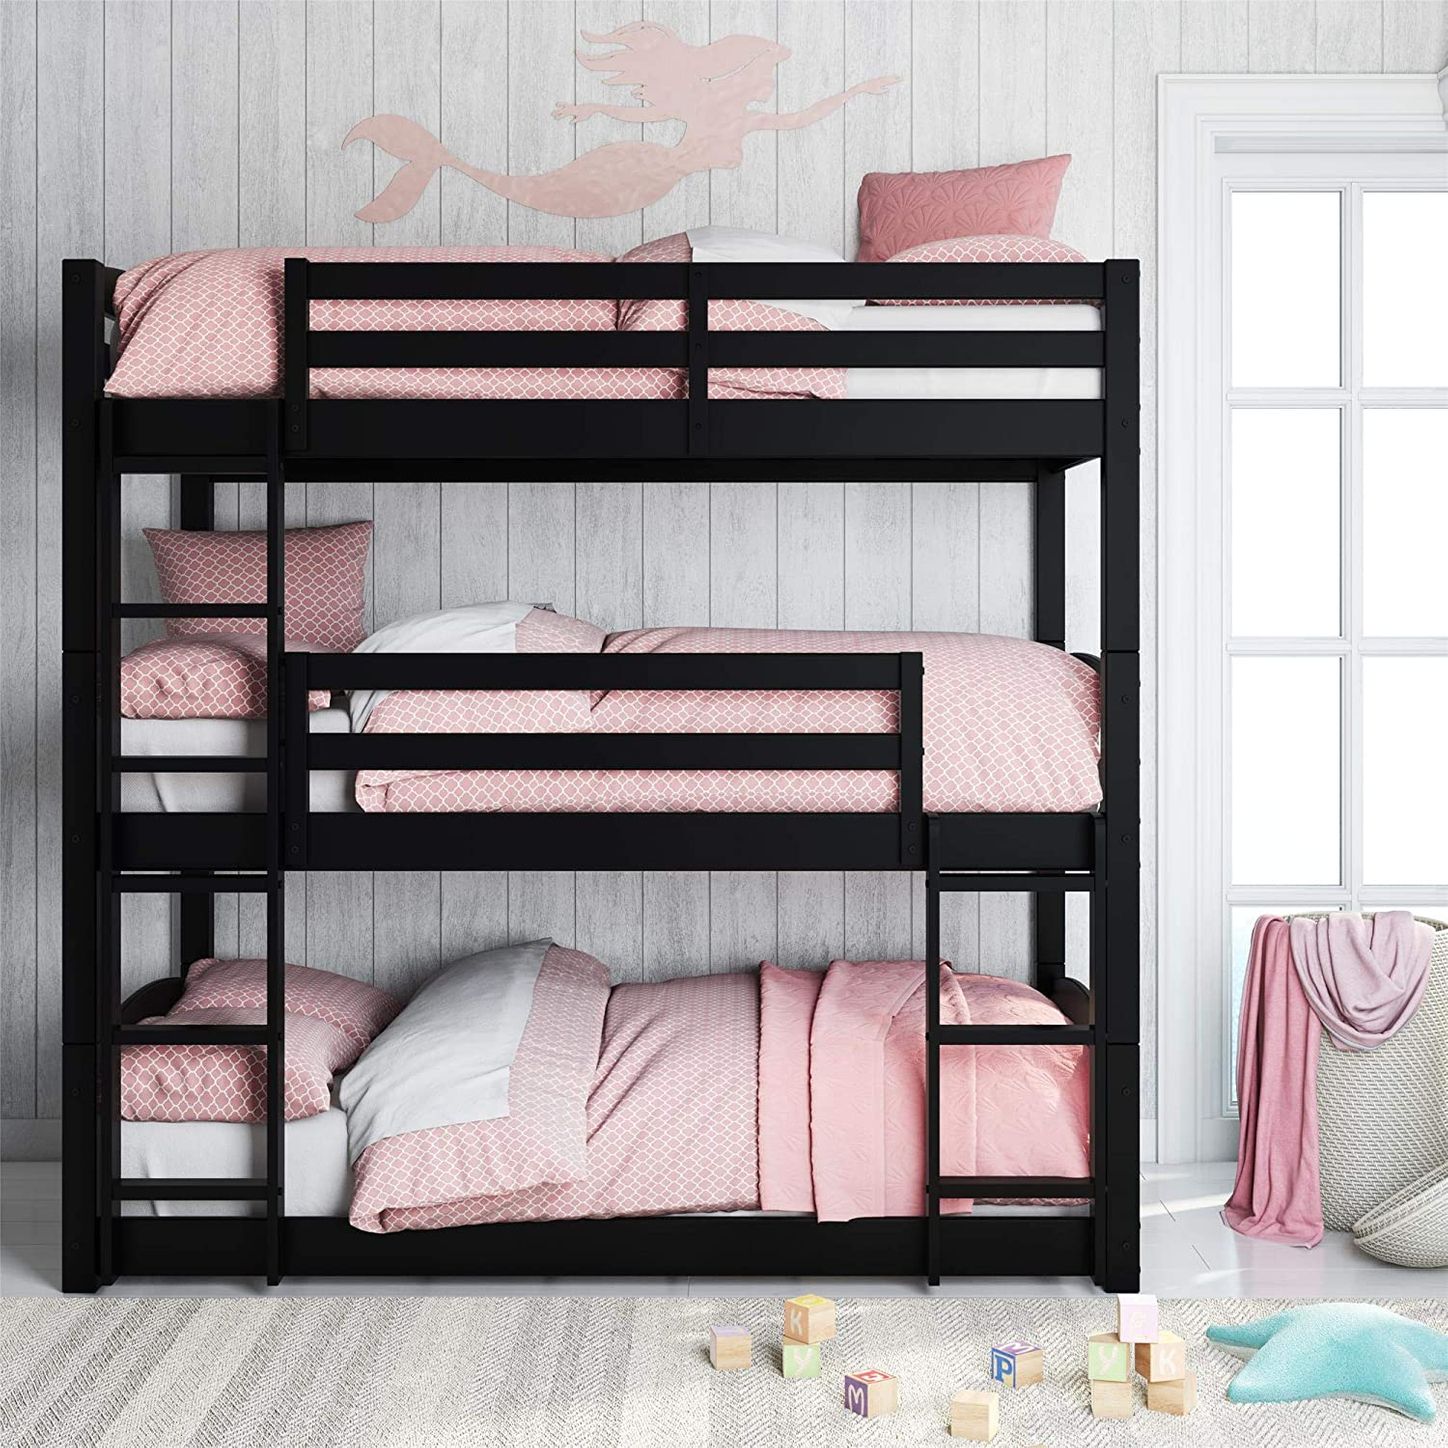 8 Best Bunk Beds 2020 The Strategist, Bunk Beds York Pa